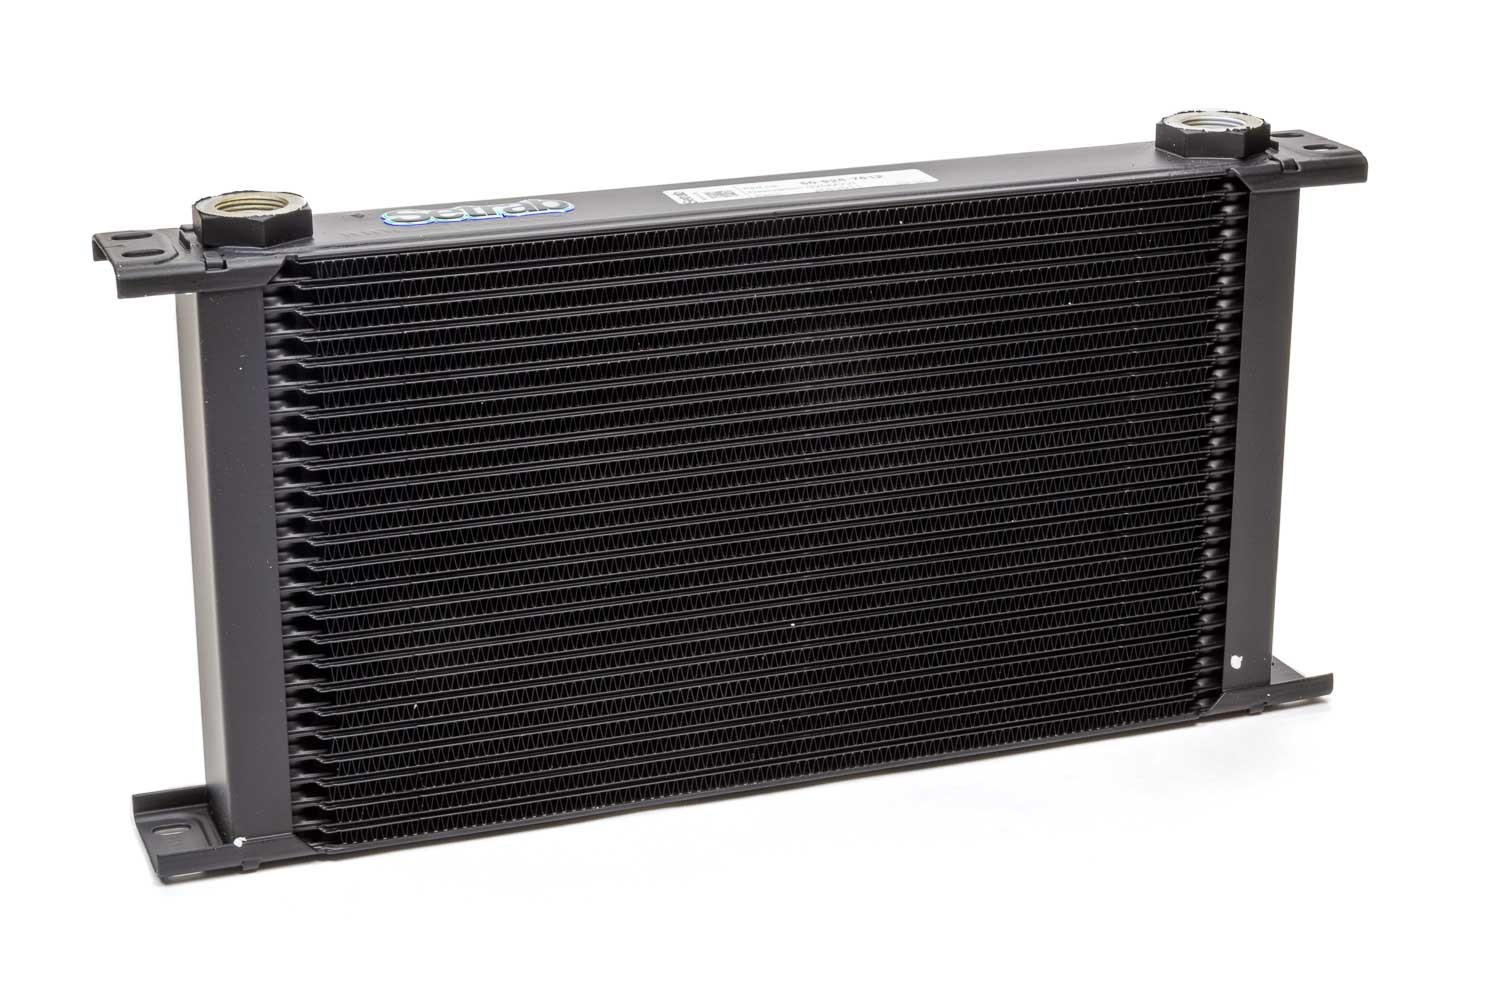 Series-9 Oil Cooler 25 Row w/M22 Ports - 50-925-7612